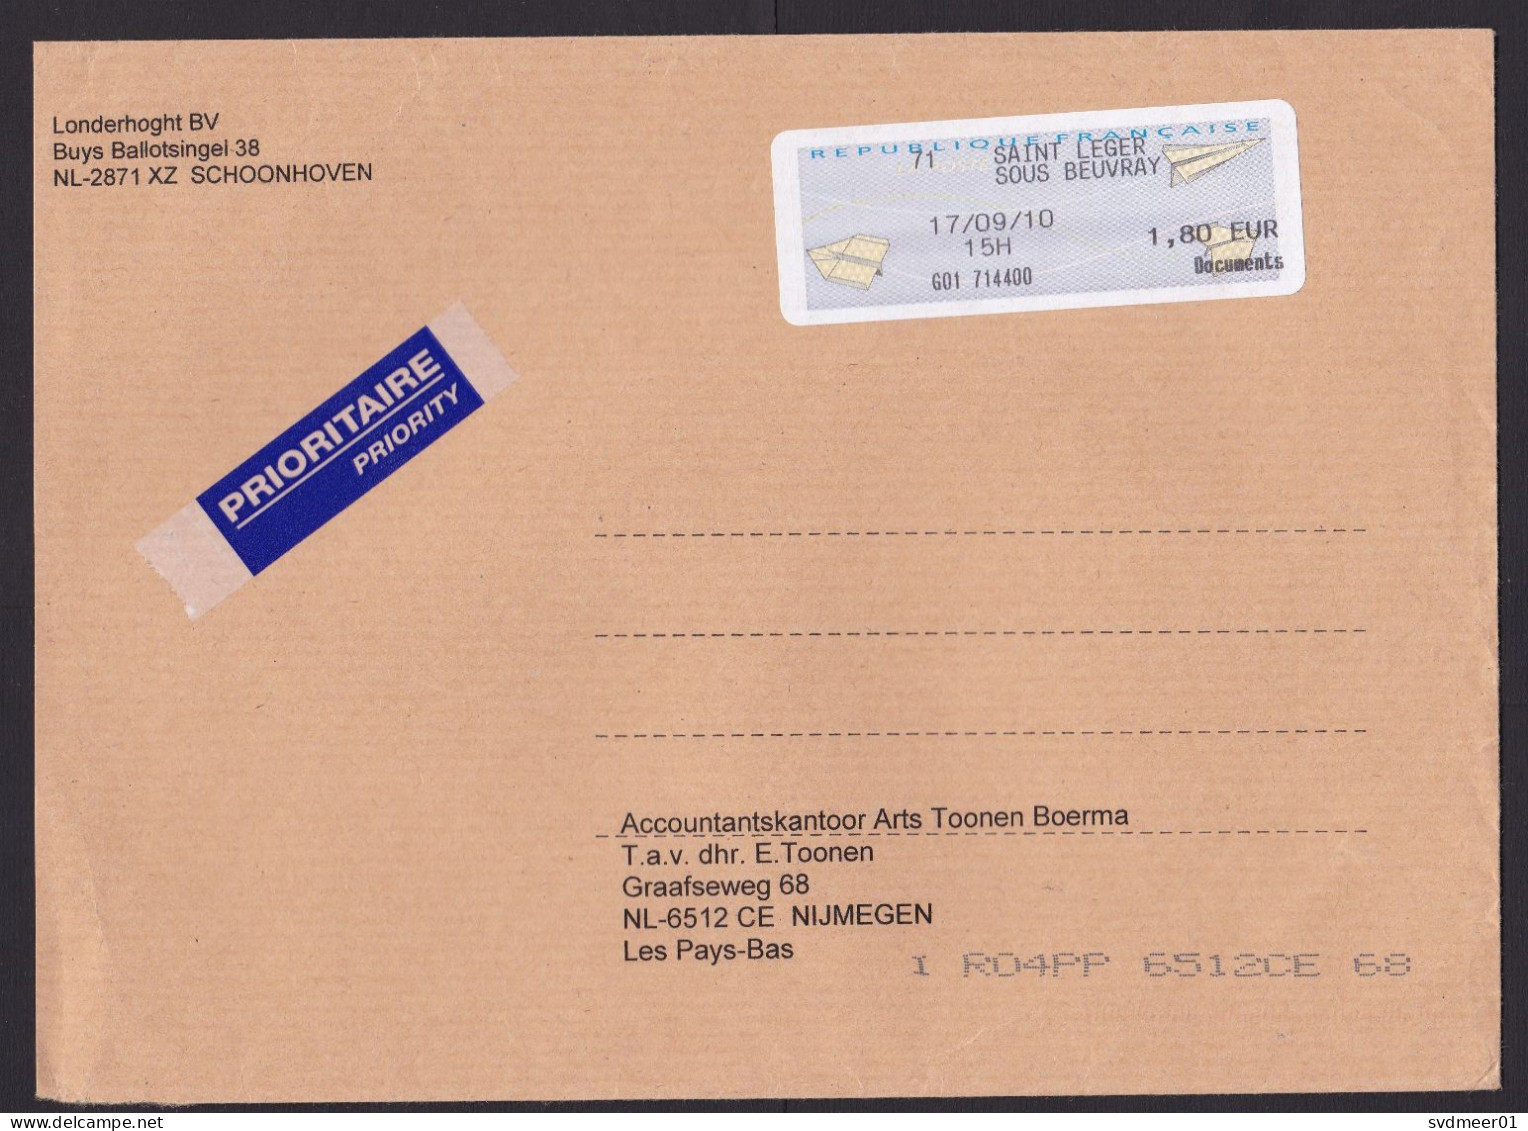 France: Priority Cover To Netherlands, 2010, ATM Machine Label, 1.80 Documents Rate, Saint Leger (traces Of Use) - Briefe U. Dokumente